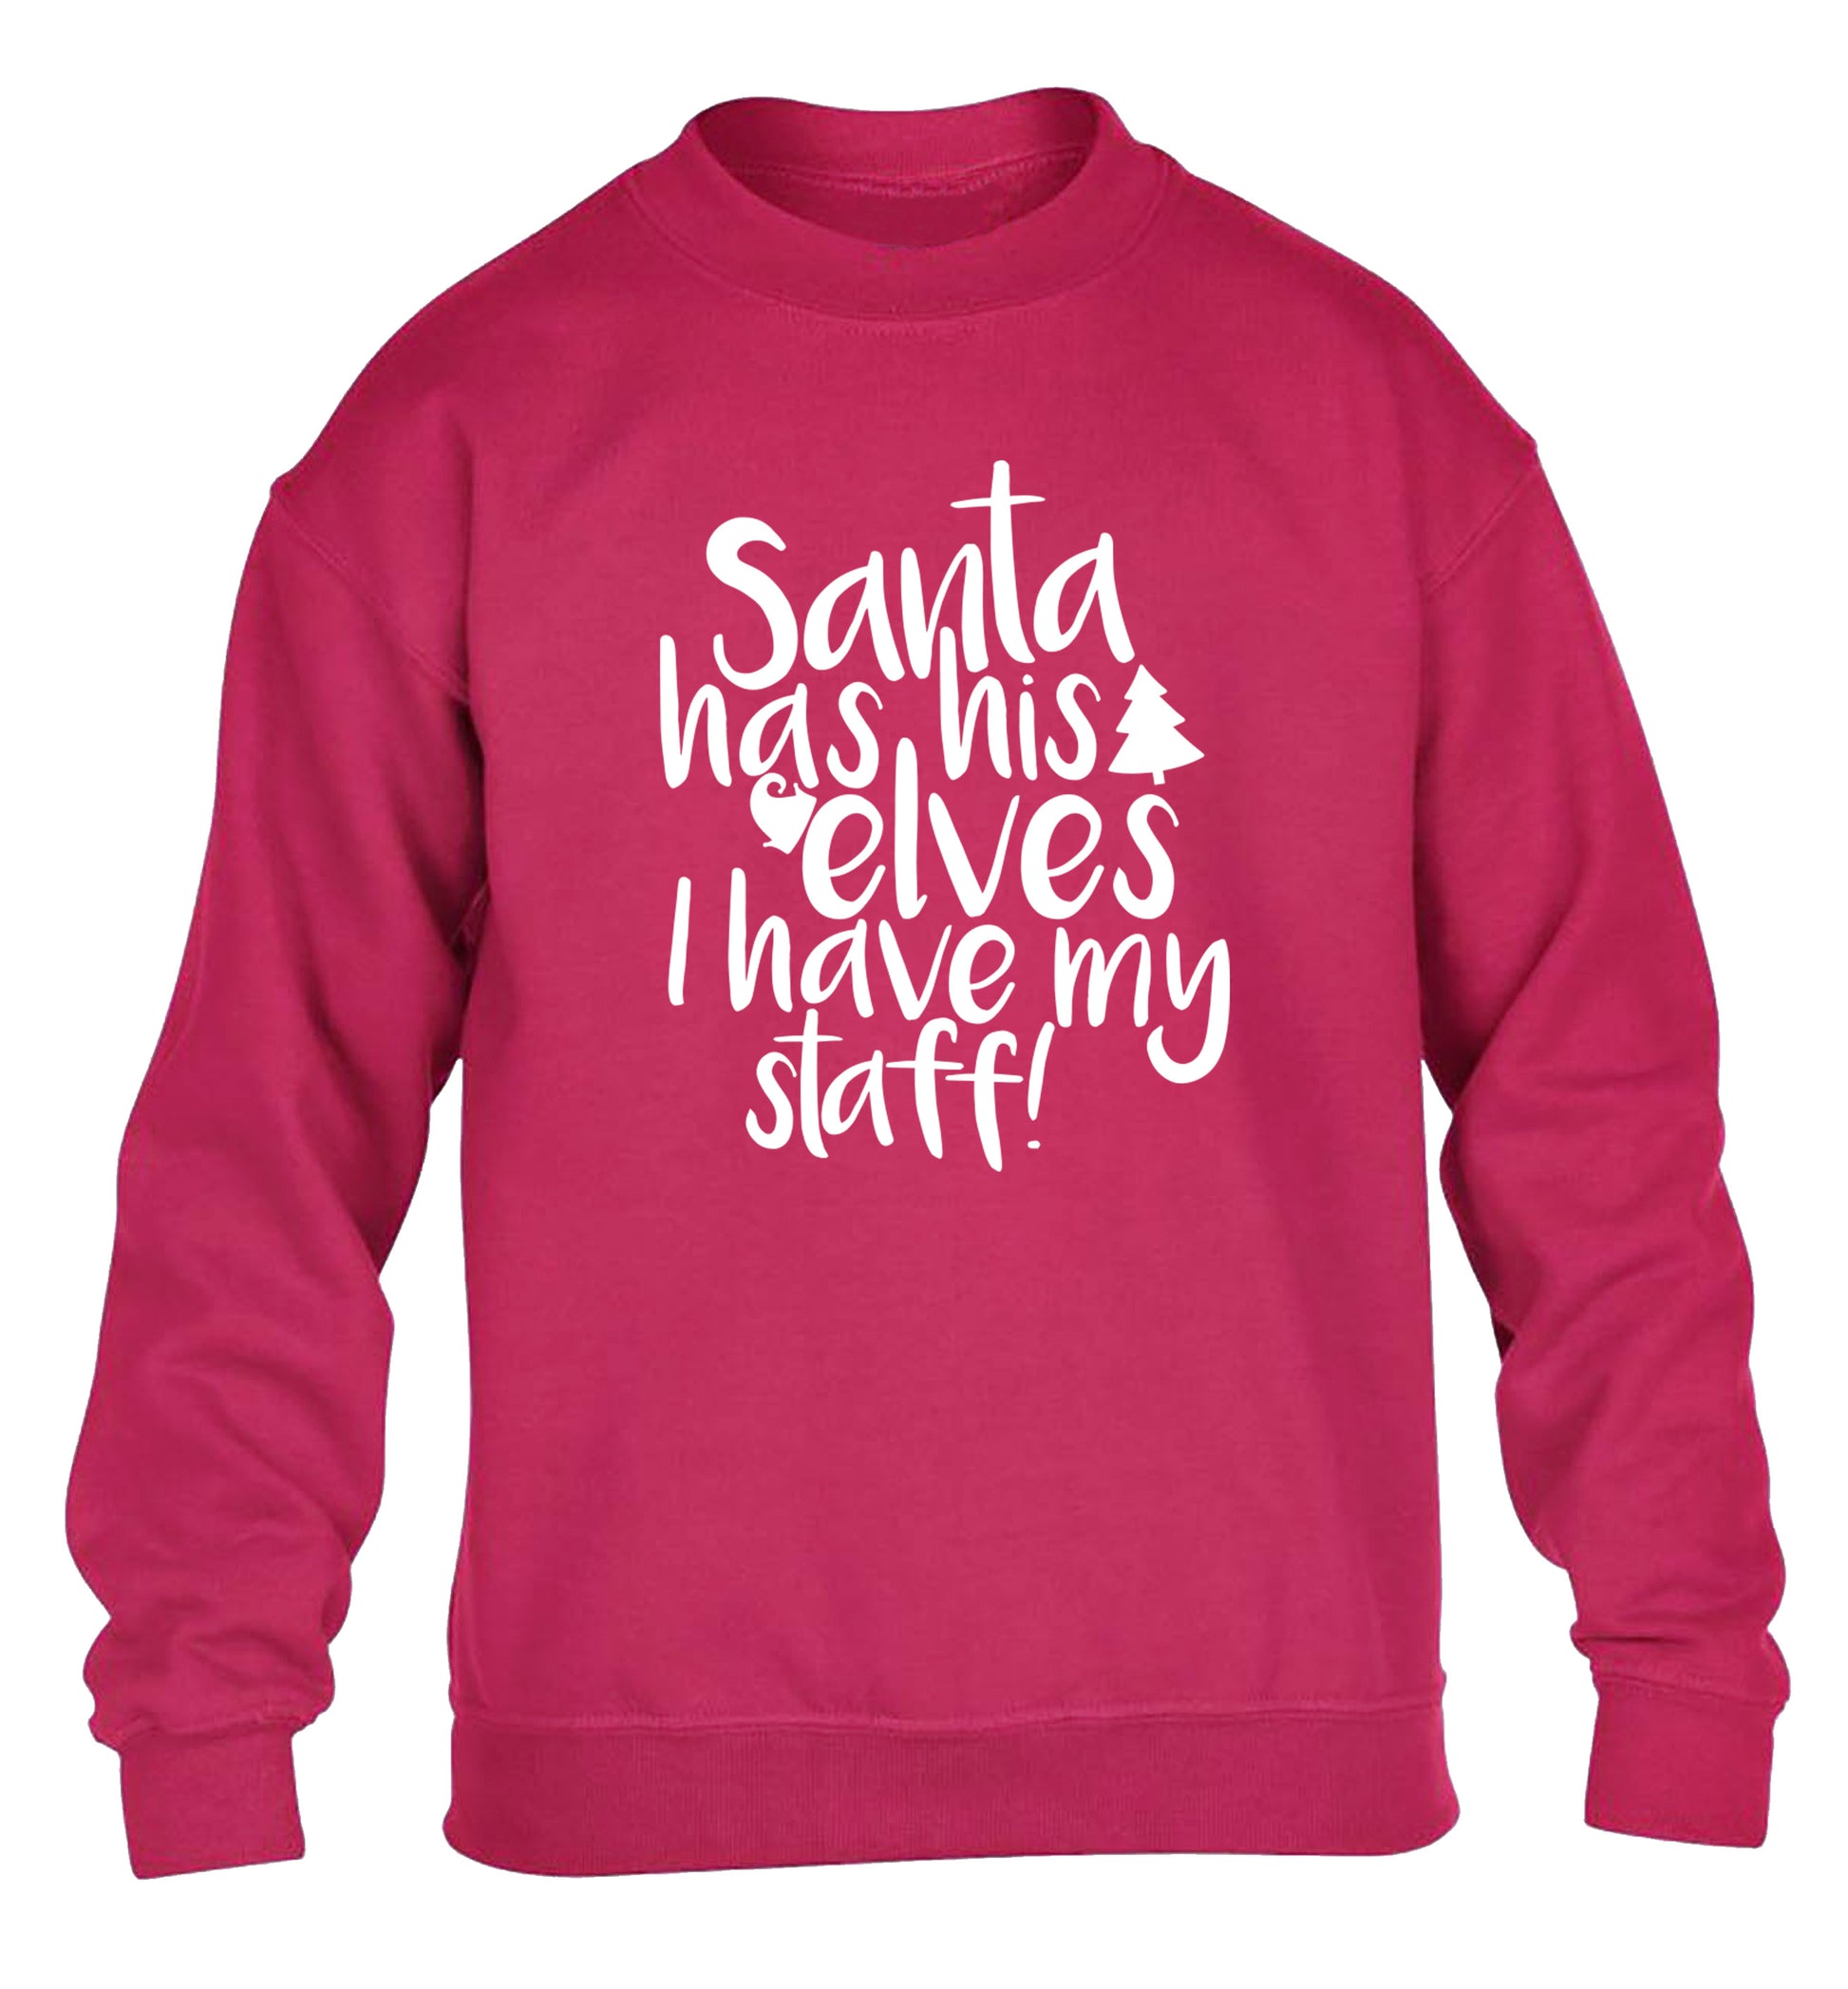 Santa has his elves I have my staff children's pink sweater 12-14 Years